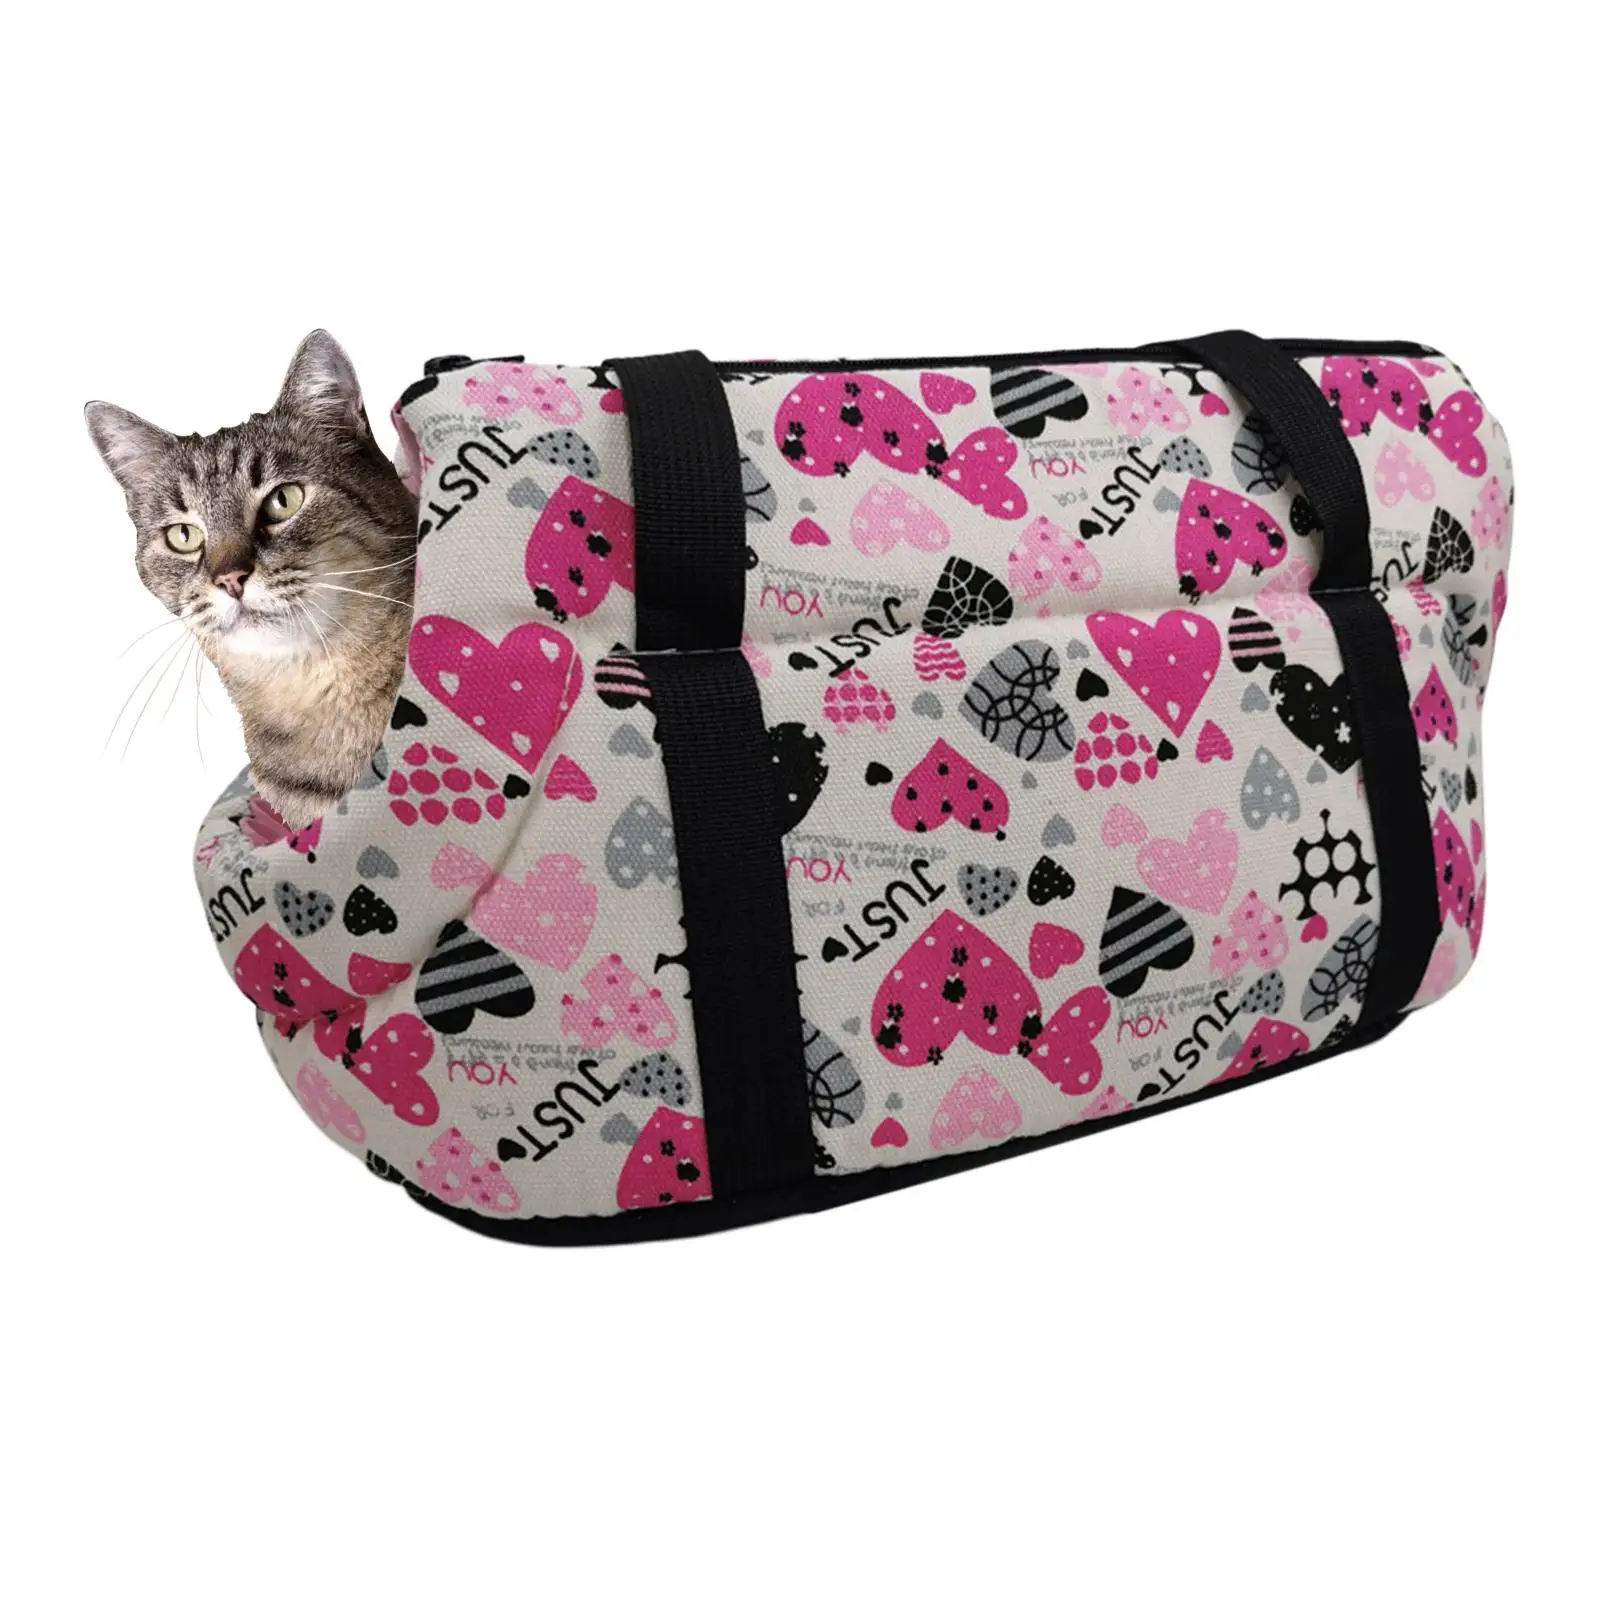 Cats Dog Carriers Fashion Adjustable Dog Backpack Tote Carrier for Travel